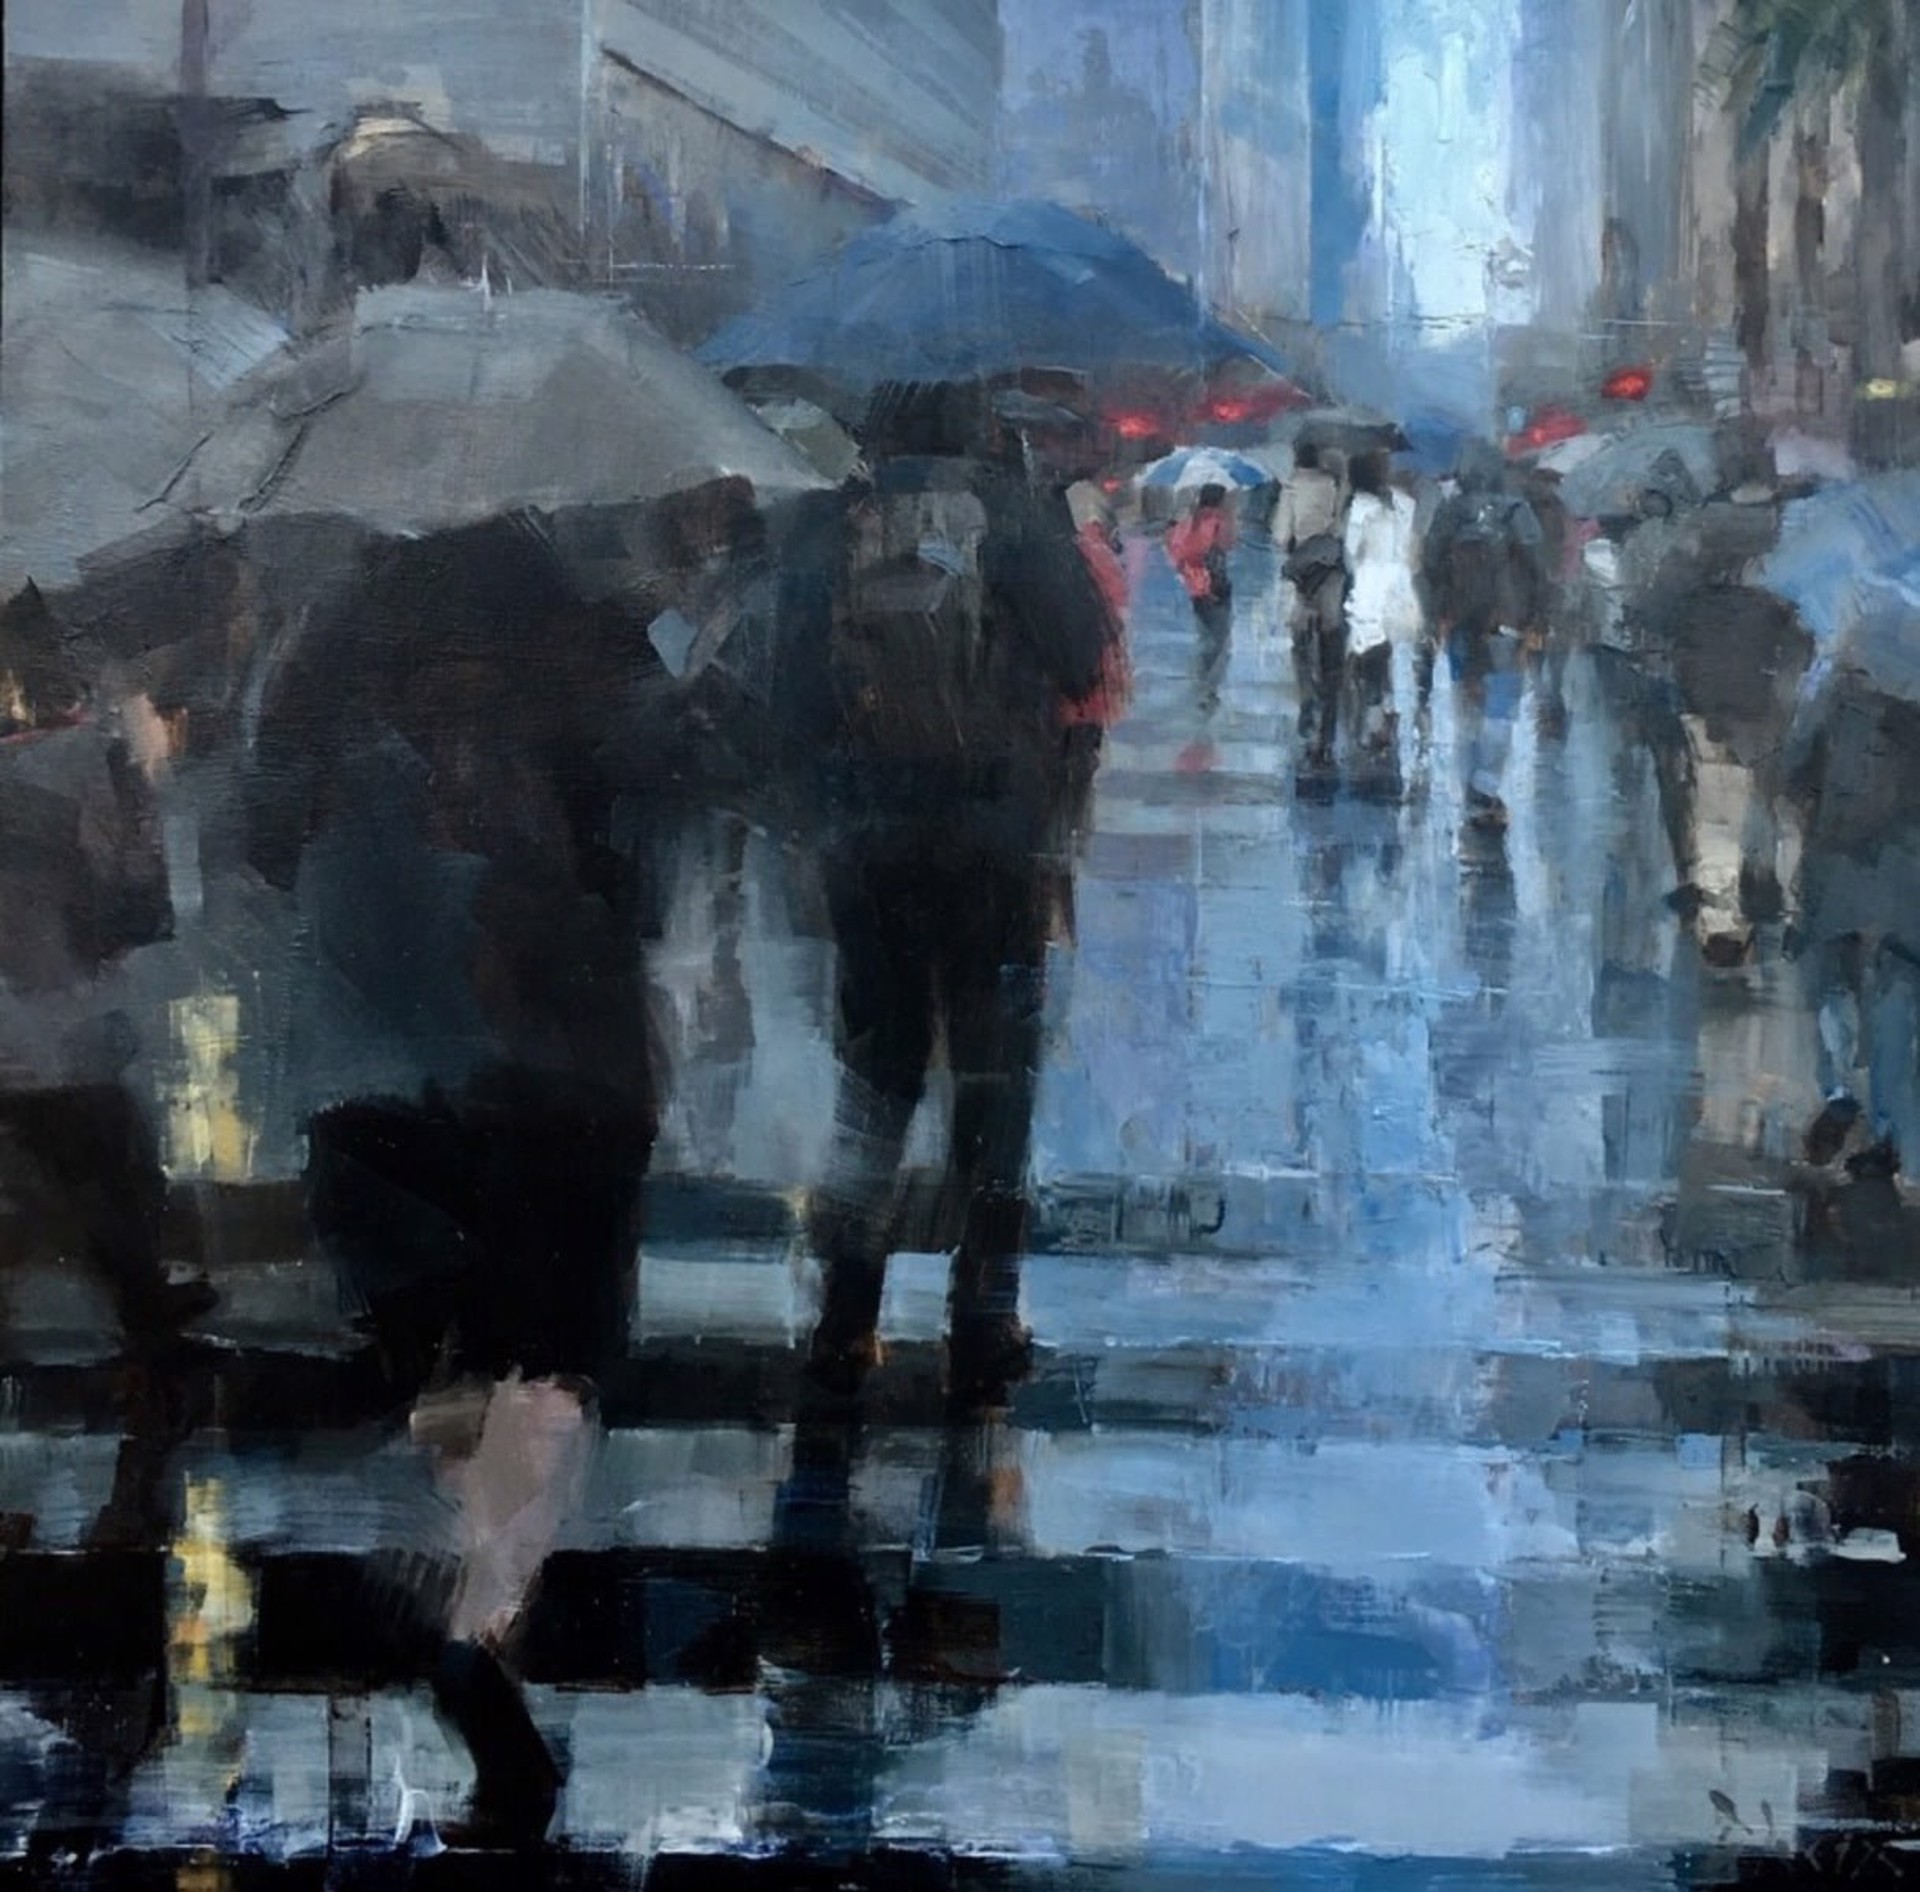 Umbrellas at Noon by Jacob Dhein